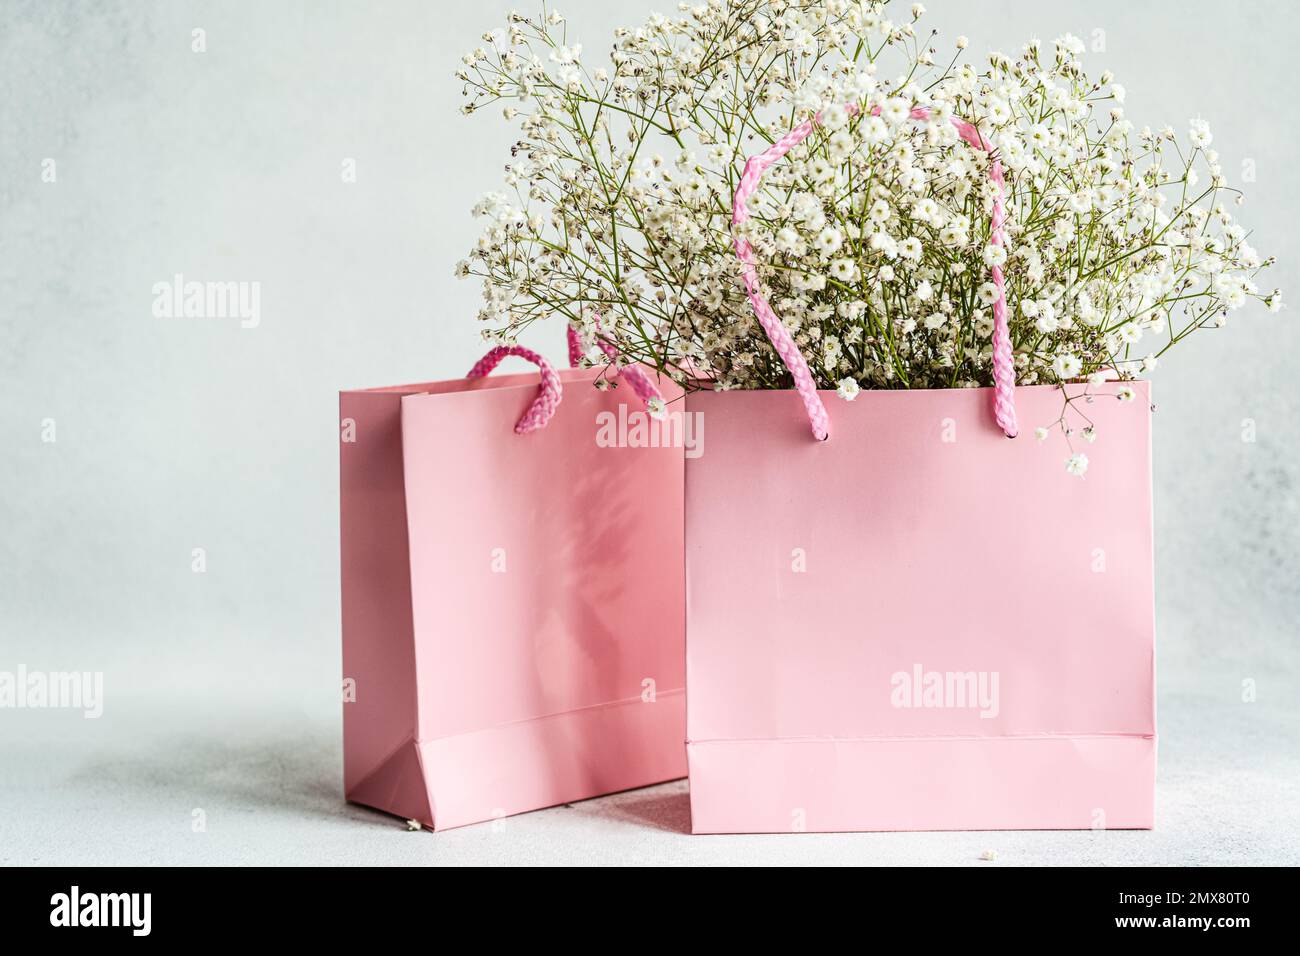 Pink paper bags and white Gypsophila flowers as a shopping concept Stock Photo